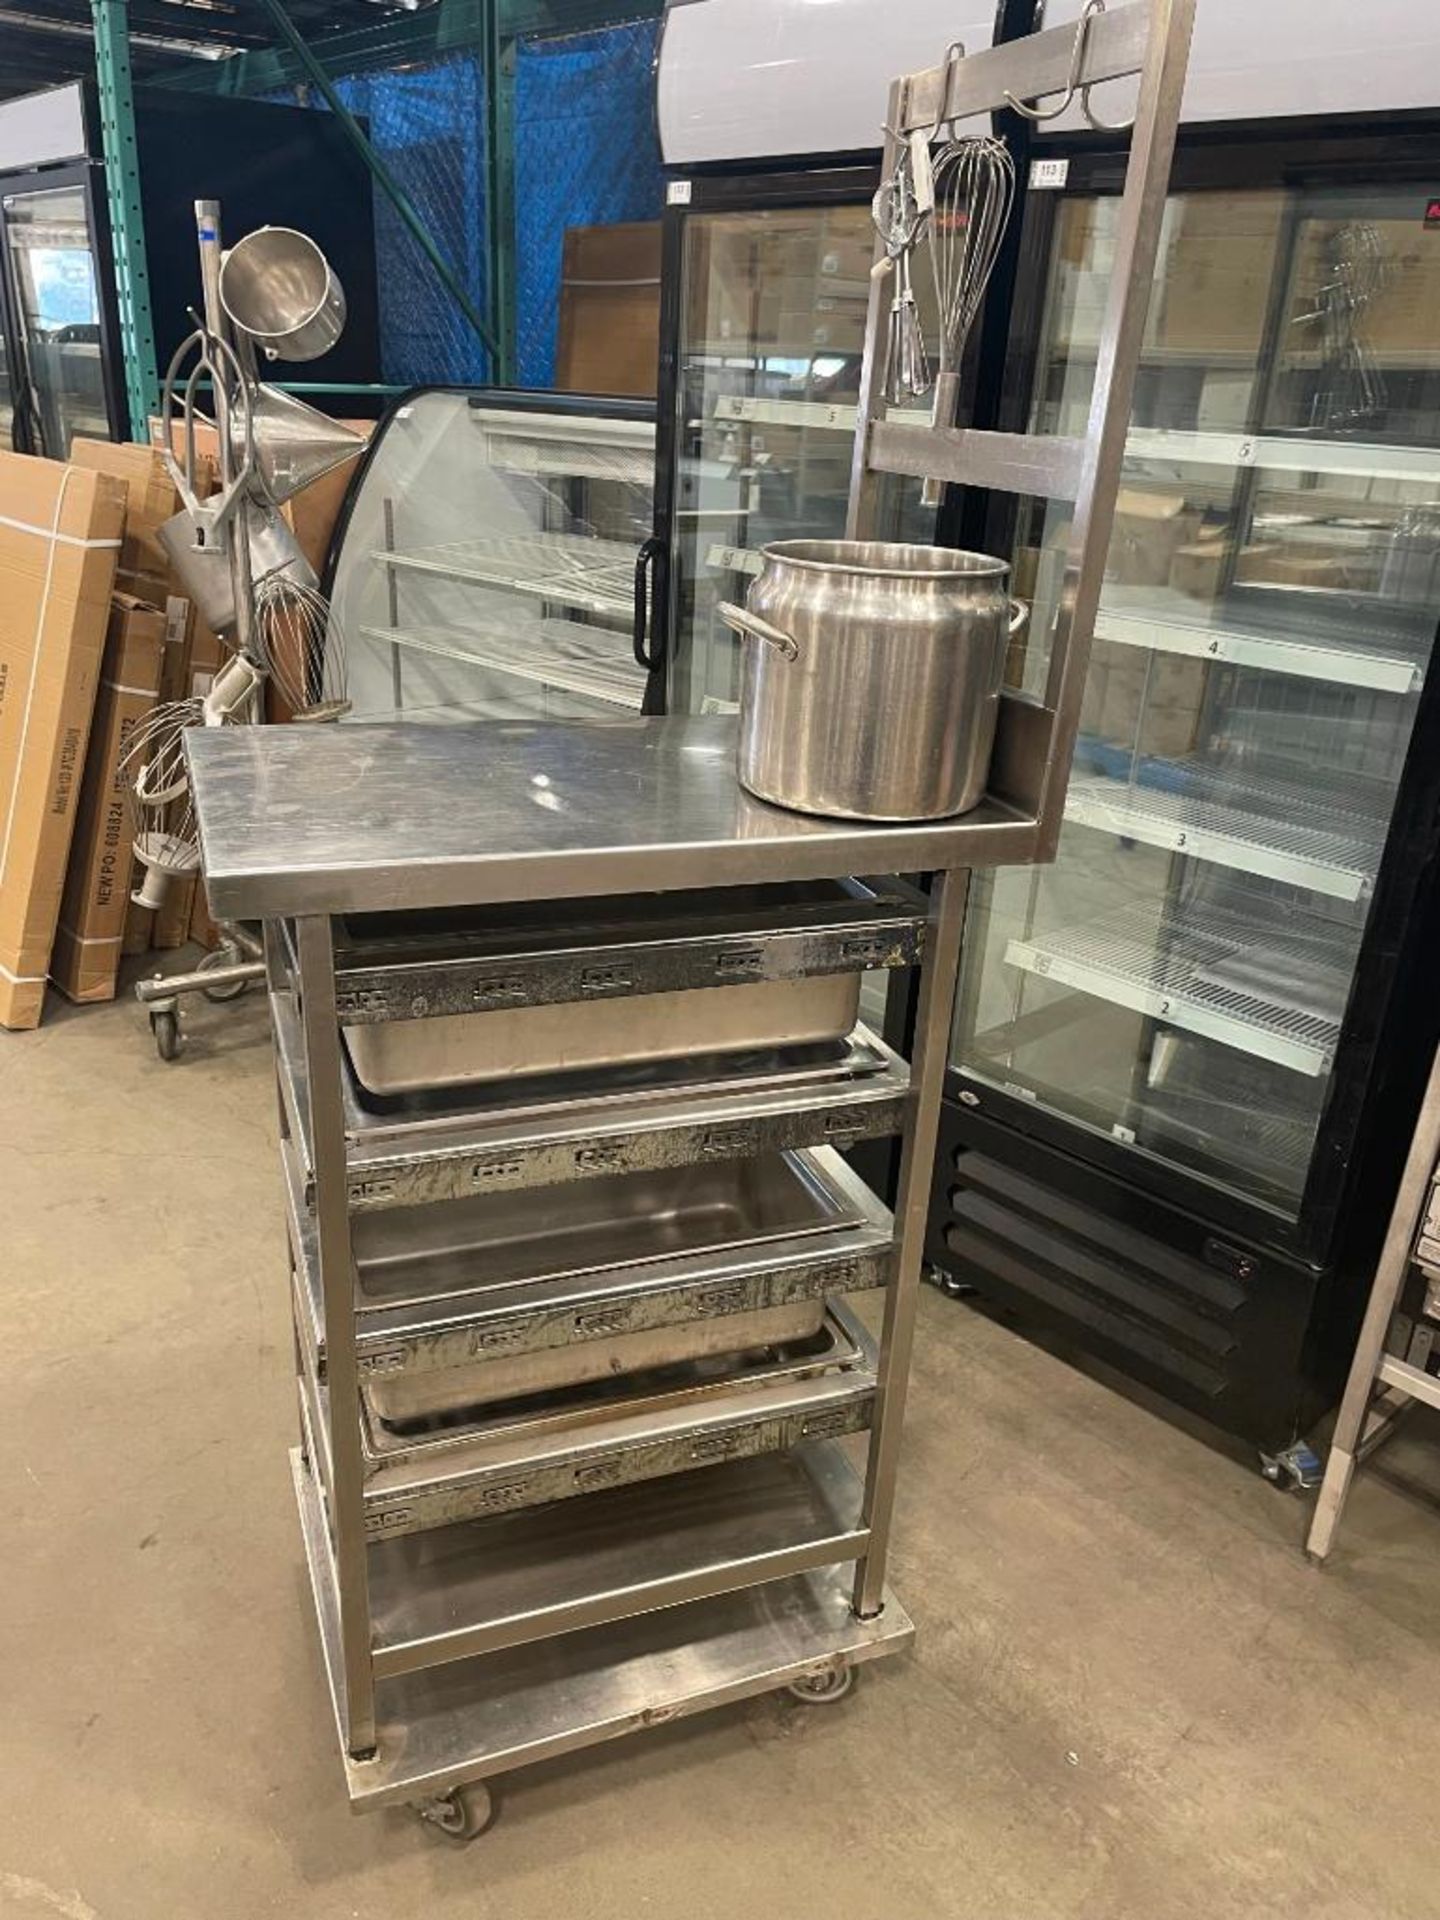 STAINLESS STEEL MOBILE PREP TABLE WITH 4 DRAWERS & POT RACK - Image 8 of 11